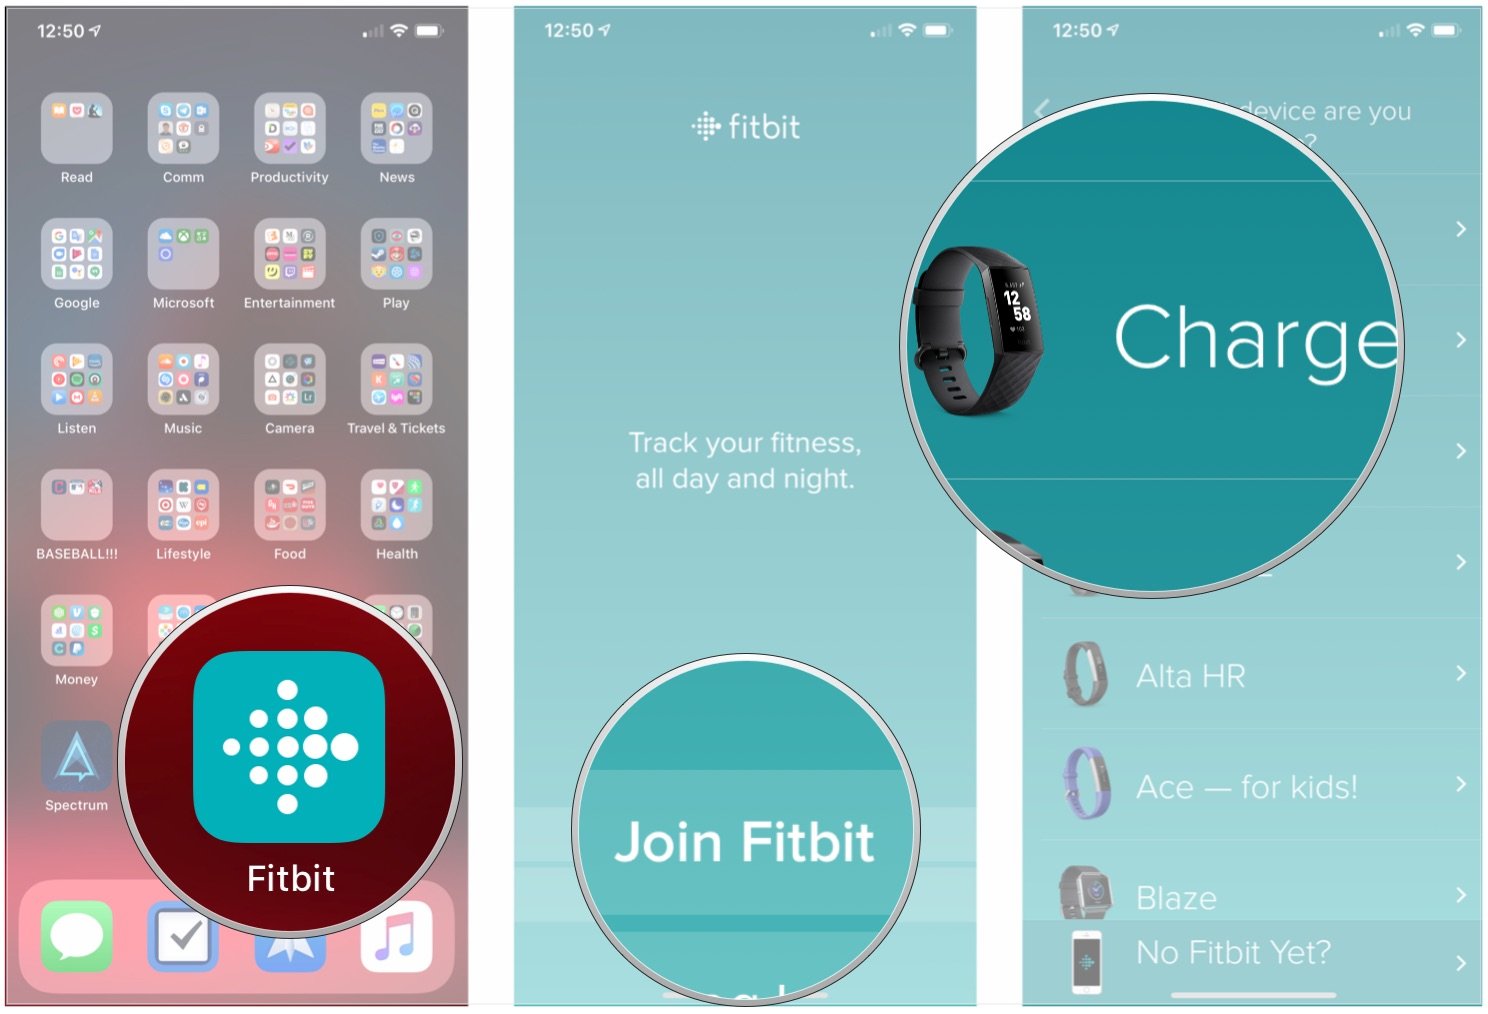 sync fitbit charge 4 to iphone